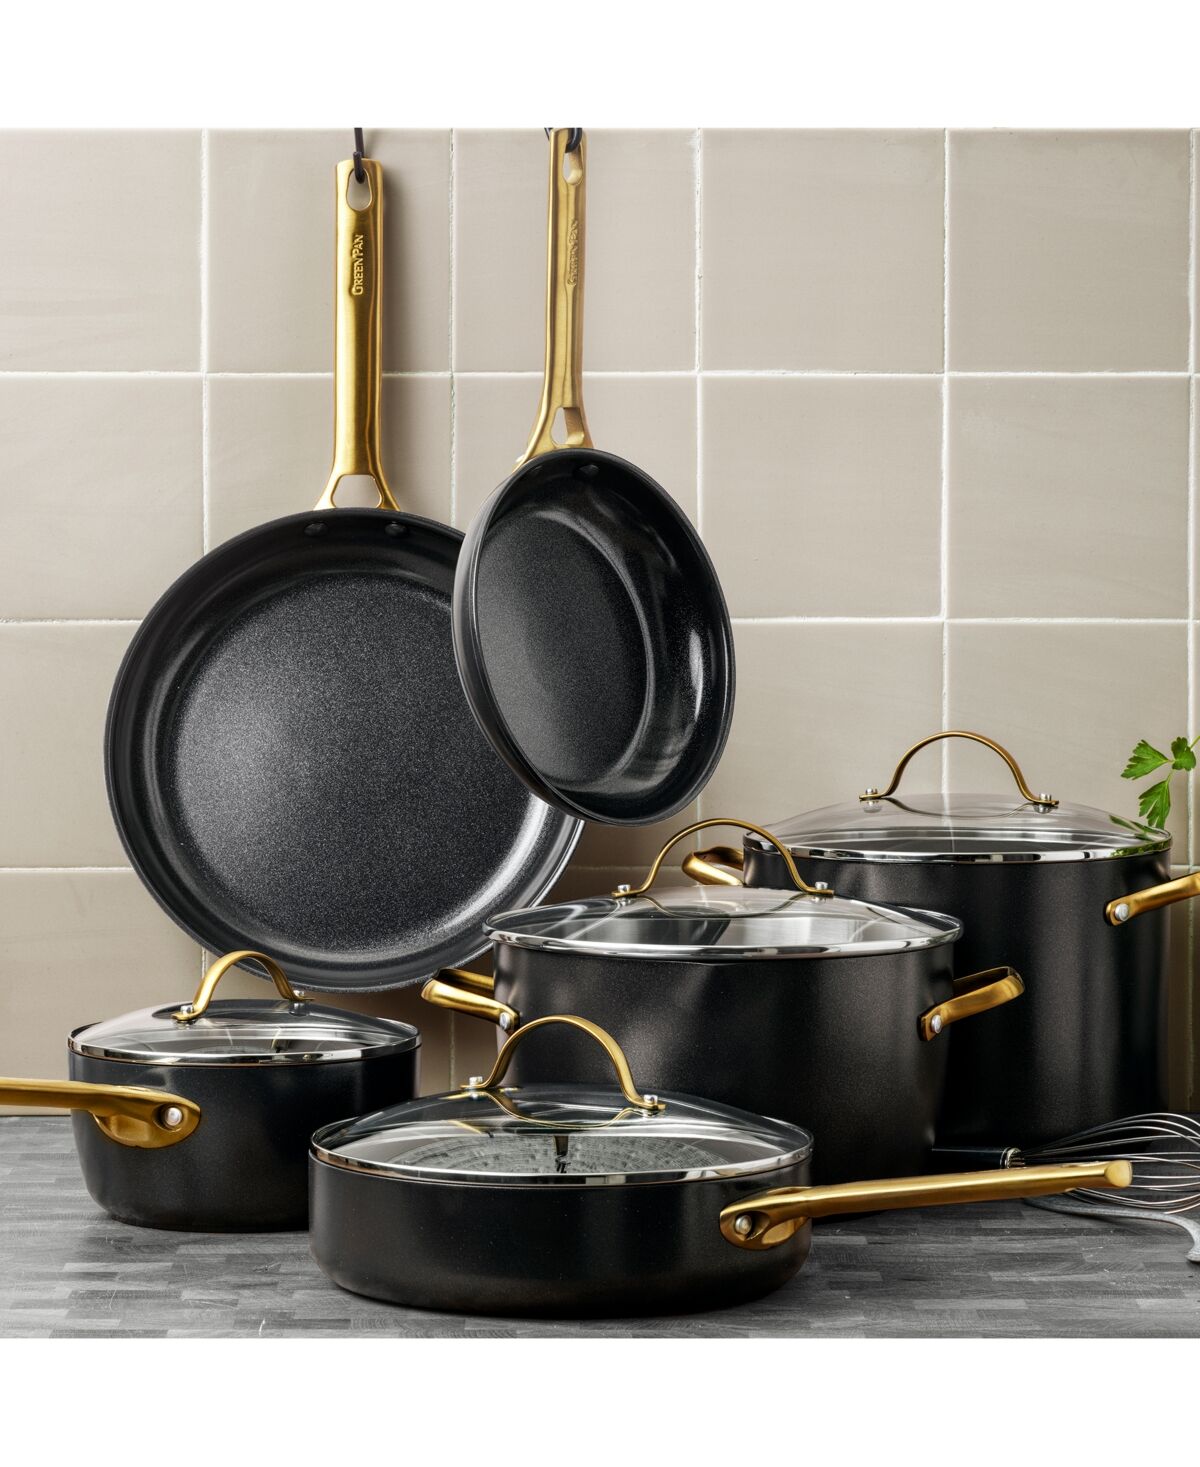 GreenPan Padova Reserve Healthy Ceramic Nonstick Cookware Set, 10 Piece - Black With Gold Handle